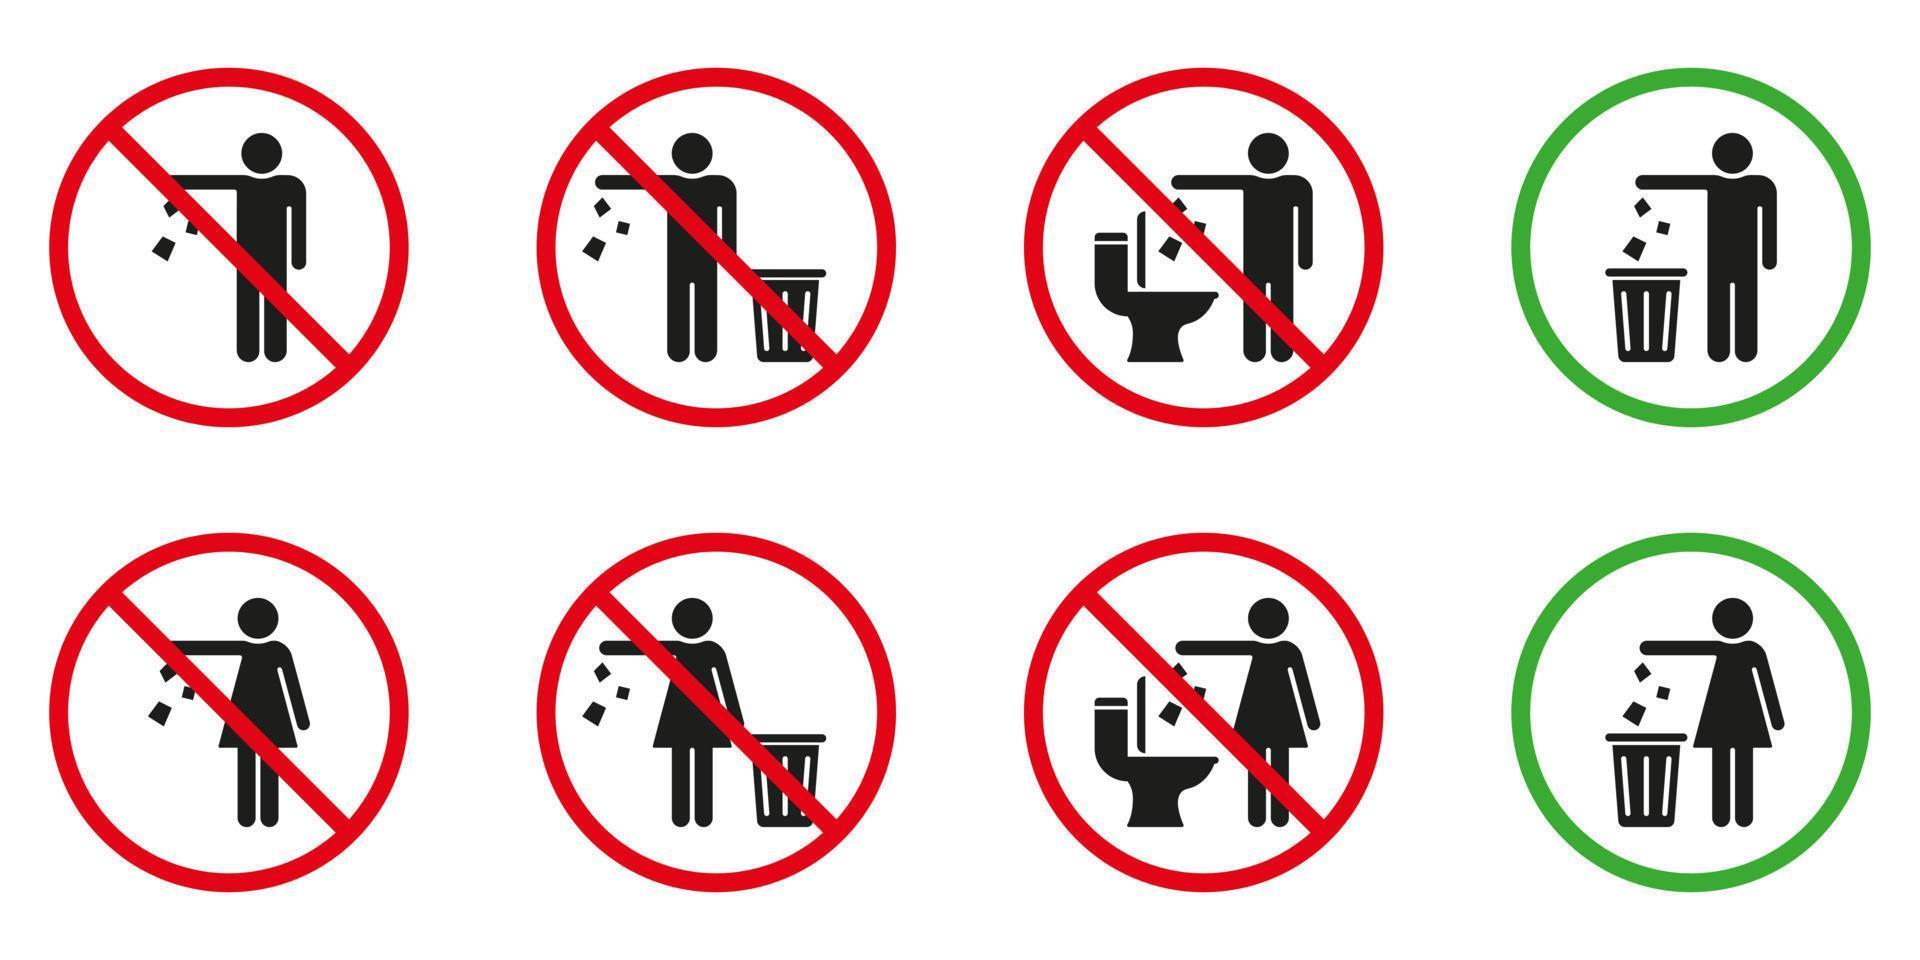 Please No Flush Litter in Toilet Sign Set. Allowed Throw Napkins, Paper, Pads, Towel Only in Waste Basket Silhouette Icon. Throw Litter in Toilet Prohibited Pictogram. Isolated Vector Illustration.